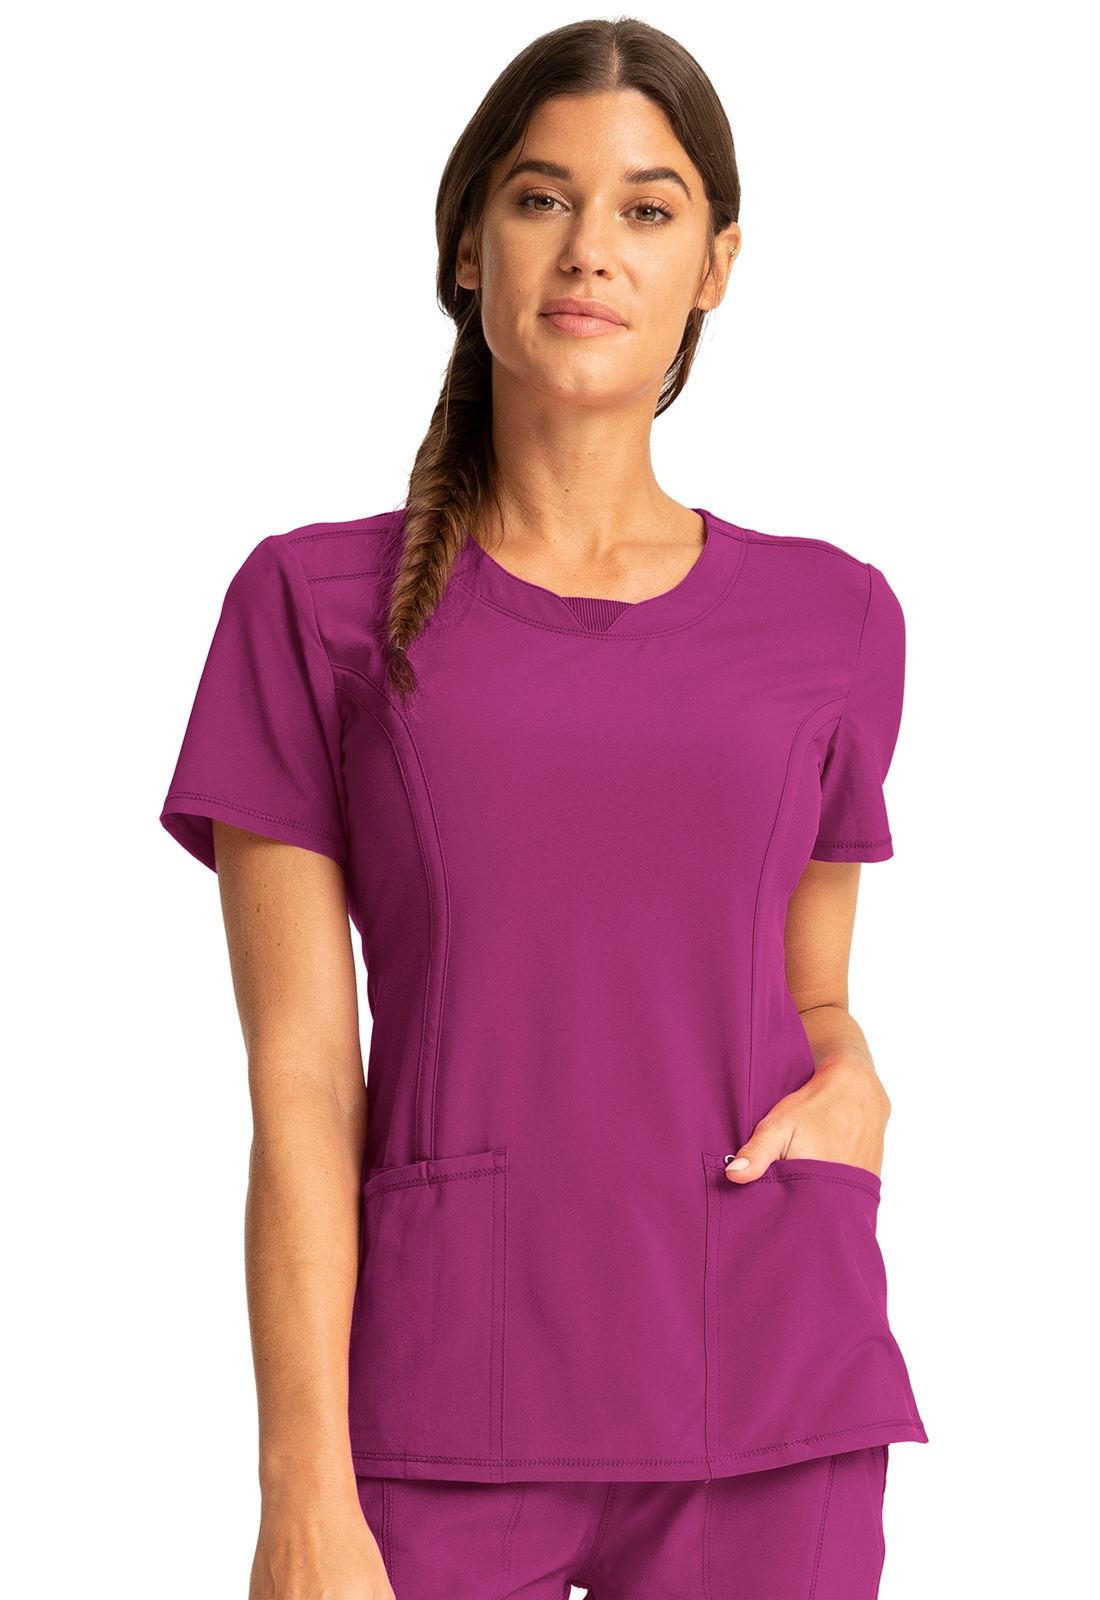 Cherokee Infinity Women's Round Neck Solid Scrub Top-2624A (Orchid Flower - XX-Large)